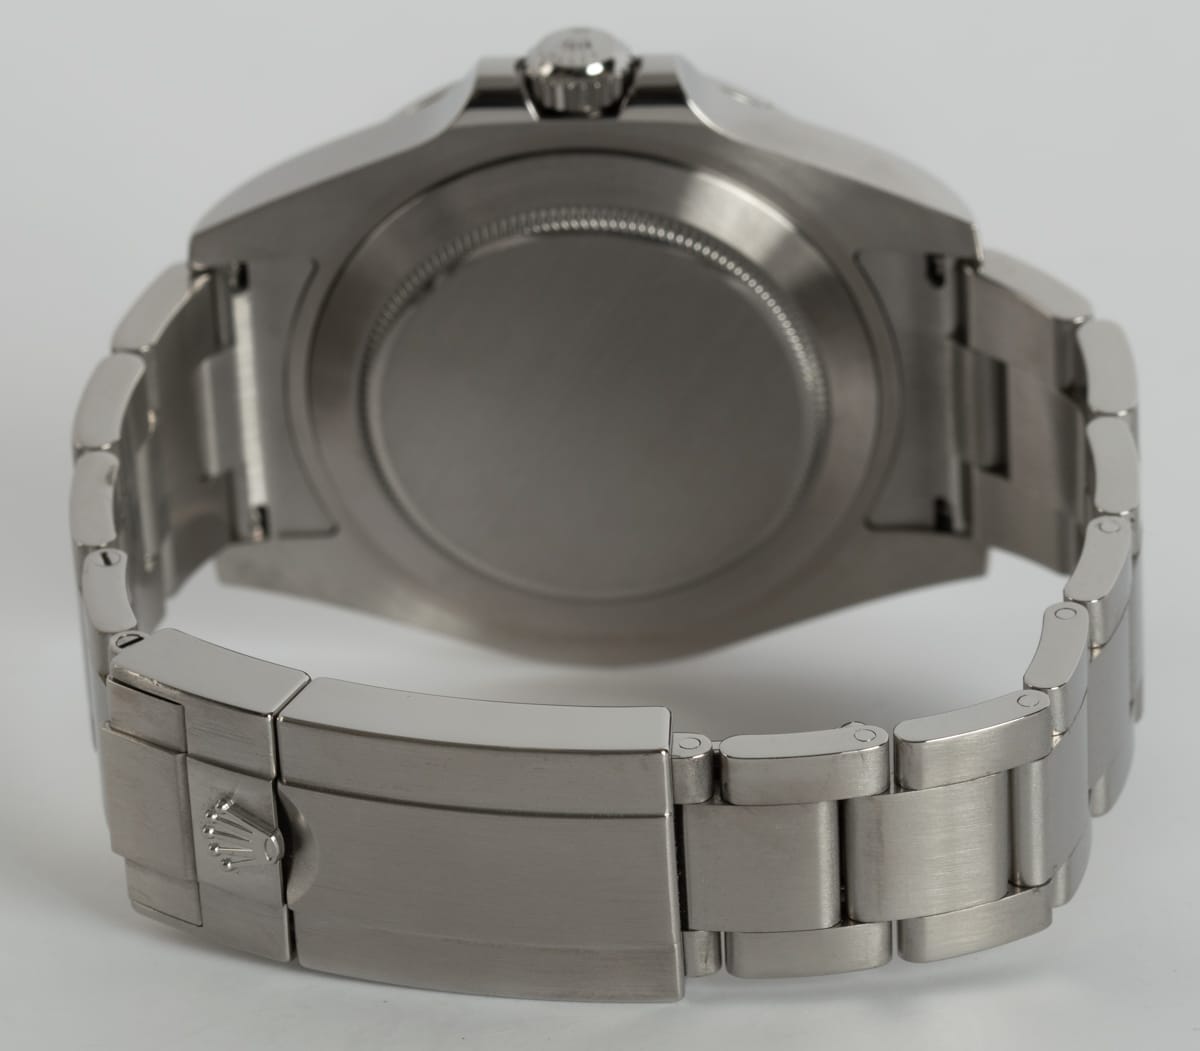 Rear / Band View of Explorer II